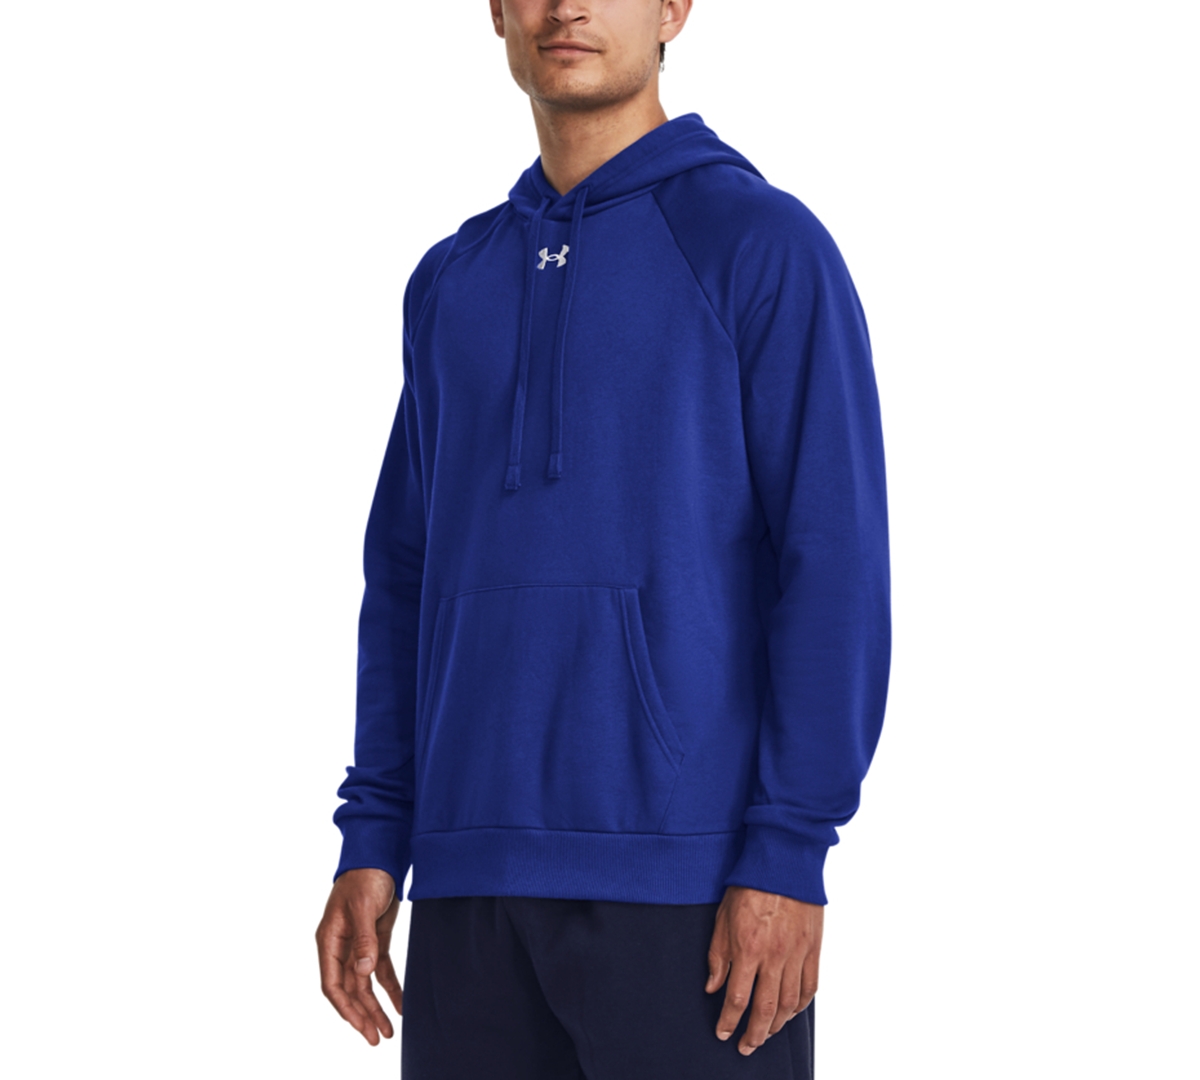 Under Armour Men's Rival Logo Embroidered Fleece Hoodie In Royal,wht